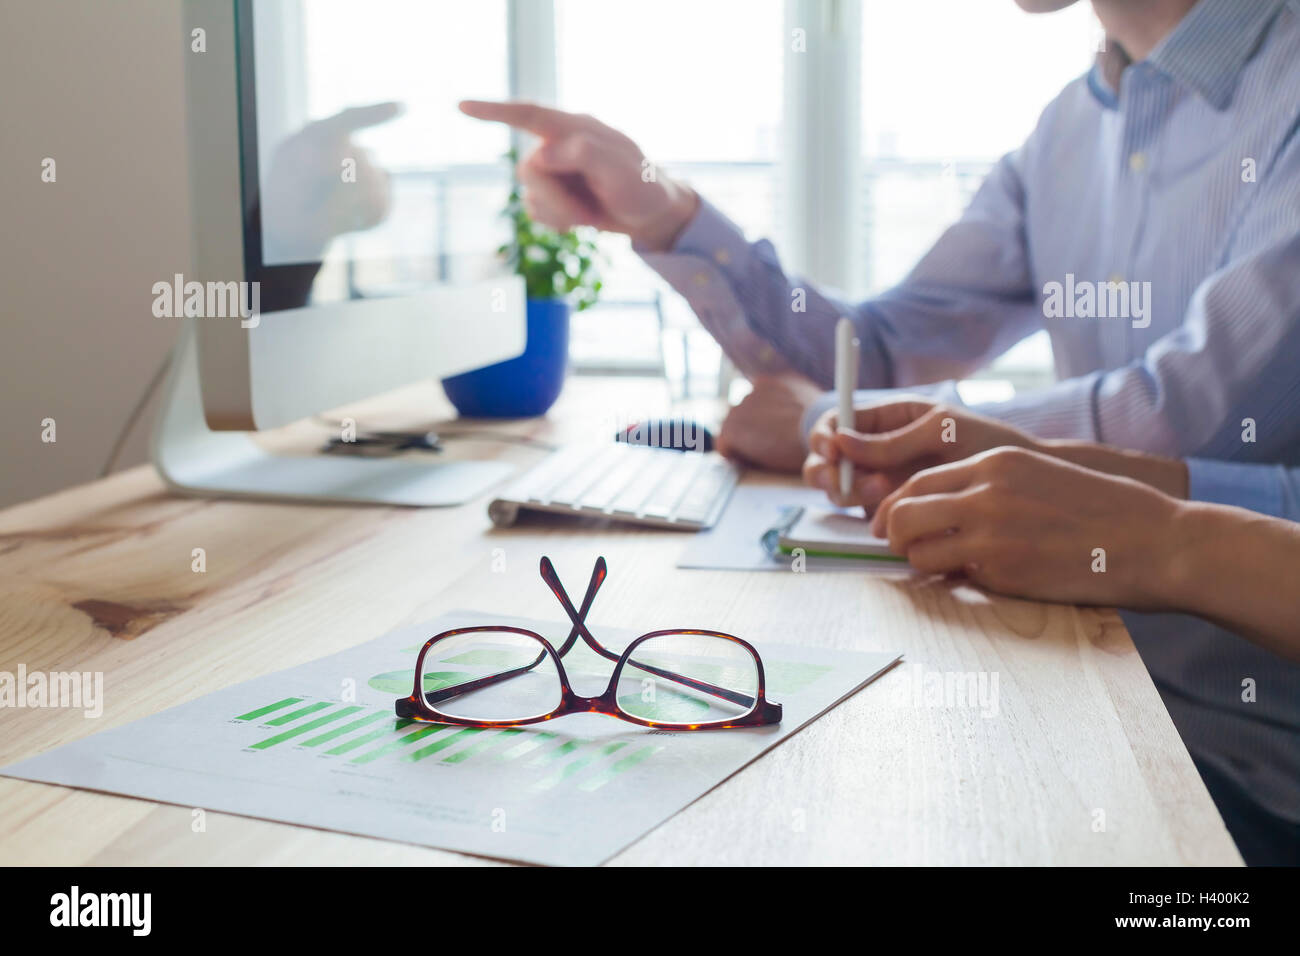 Meeting of business people in co-working office, one person teaching the other one, close-up on glasses Stock Photo